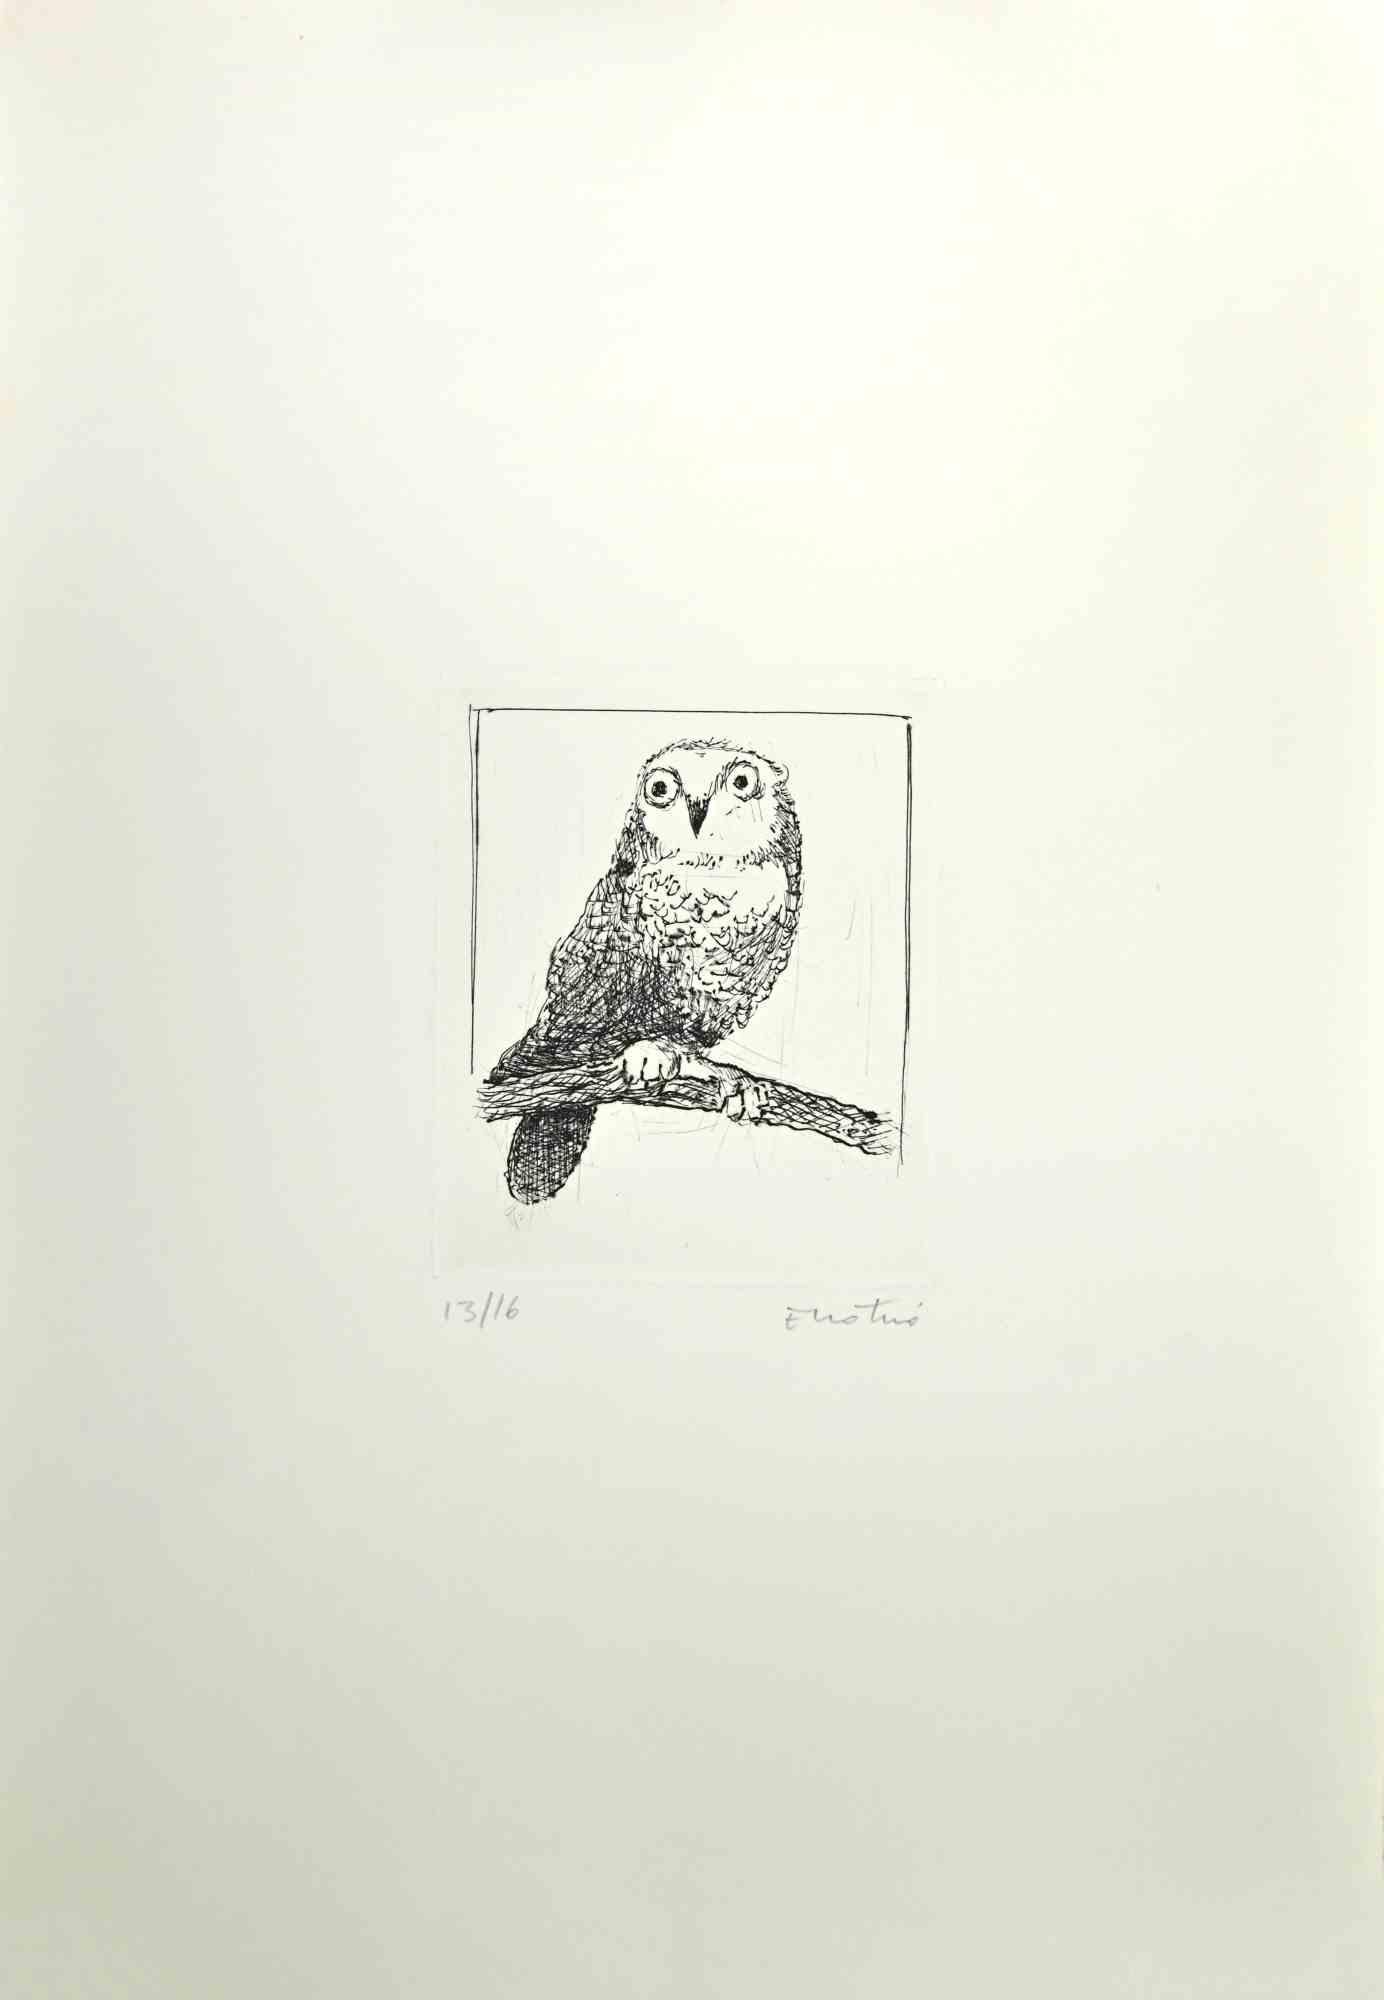 Owl - Etching by Enotrio Pugliese - 1970s